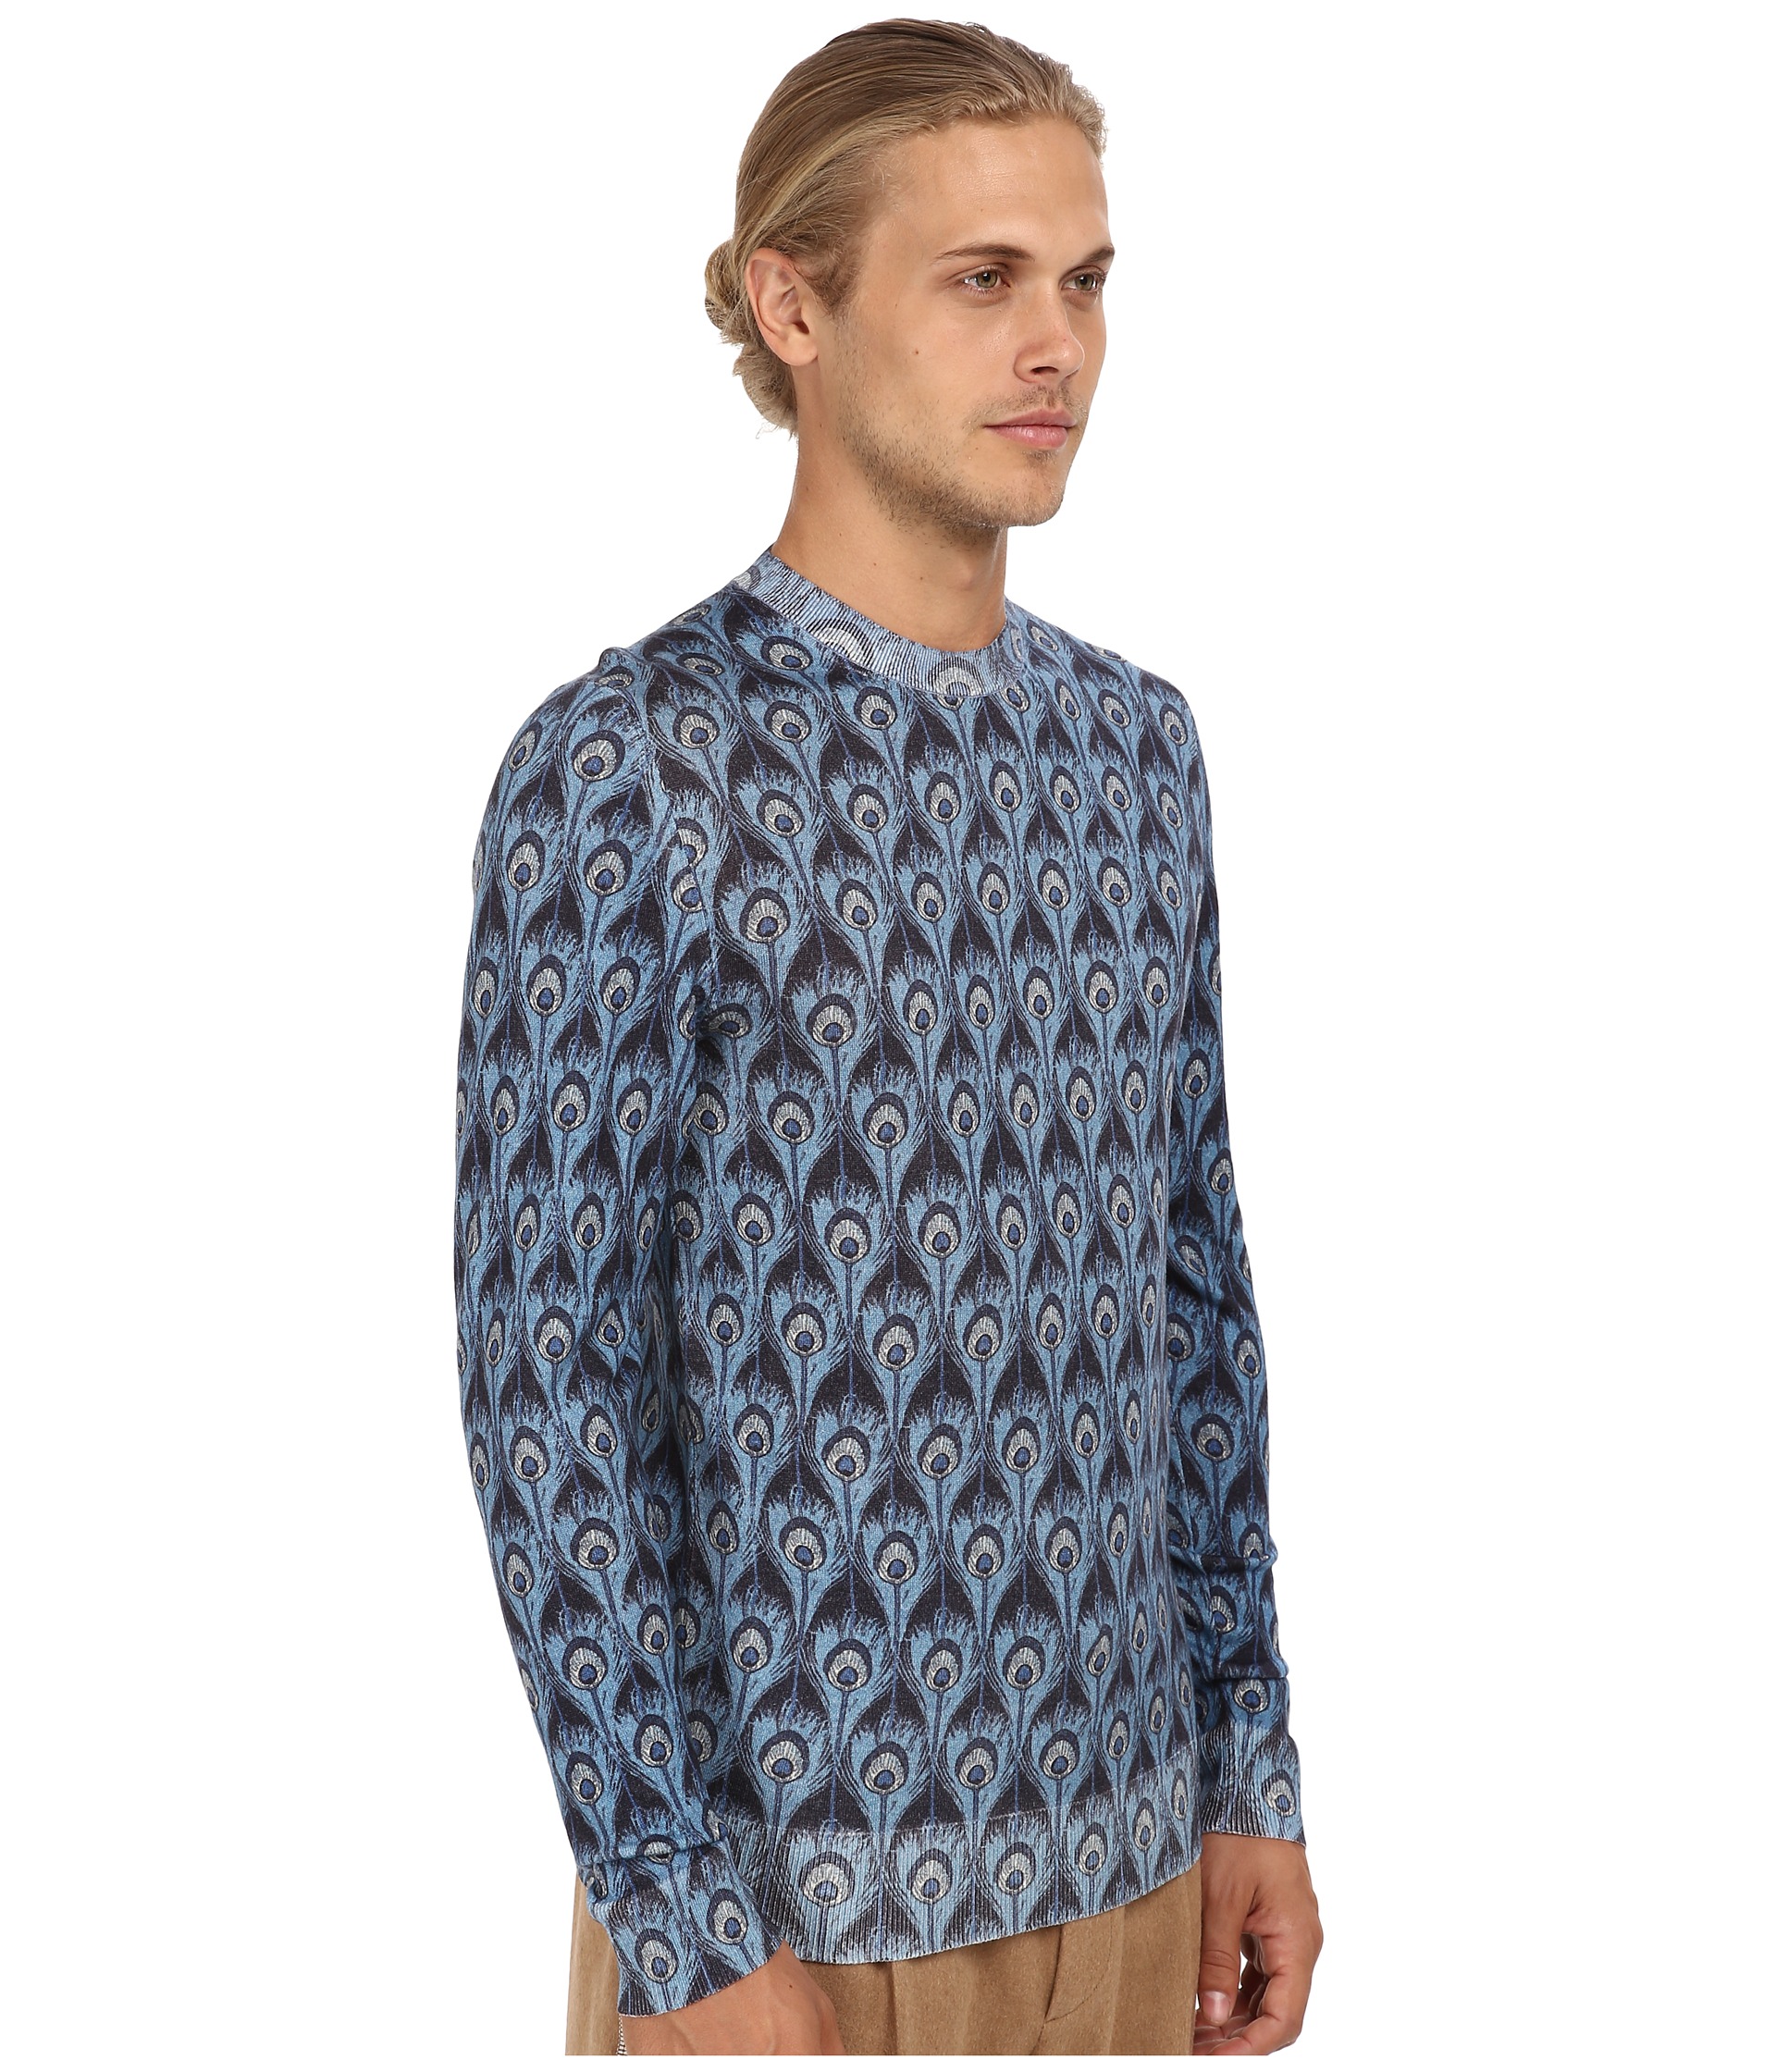 Marc Jacobs Peacock Print Crewneck Sweater Blue | Shipped Free at Zappos